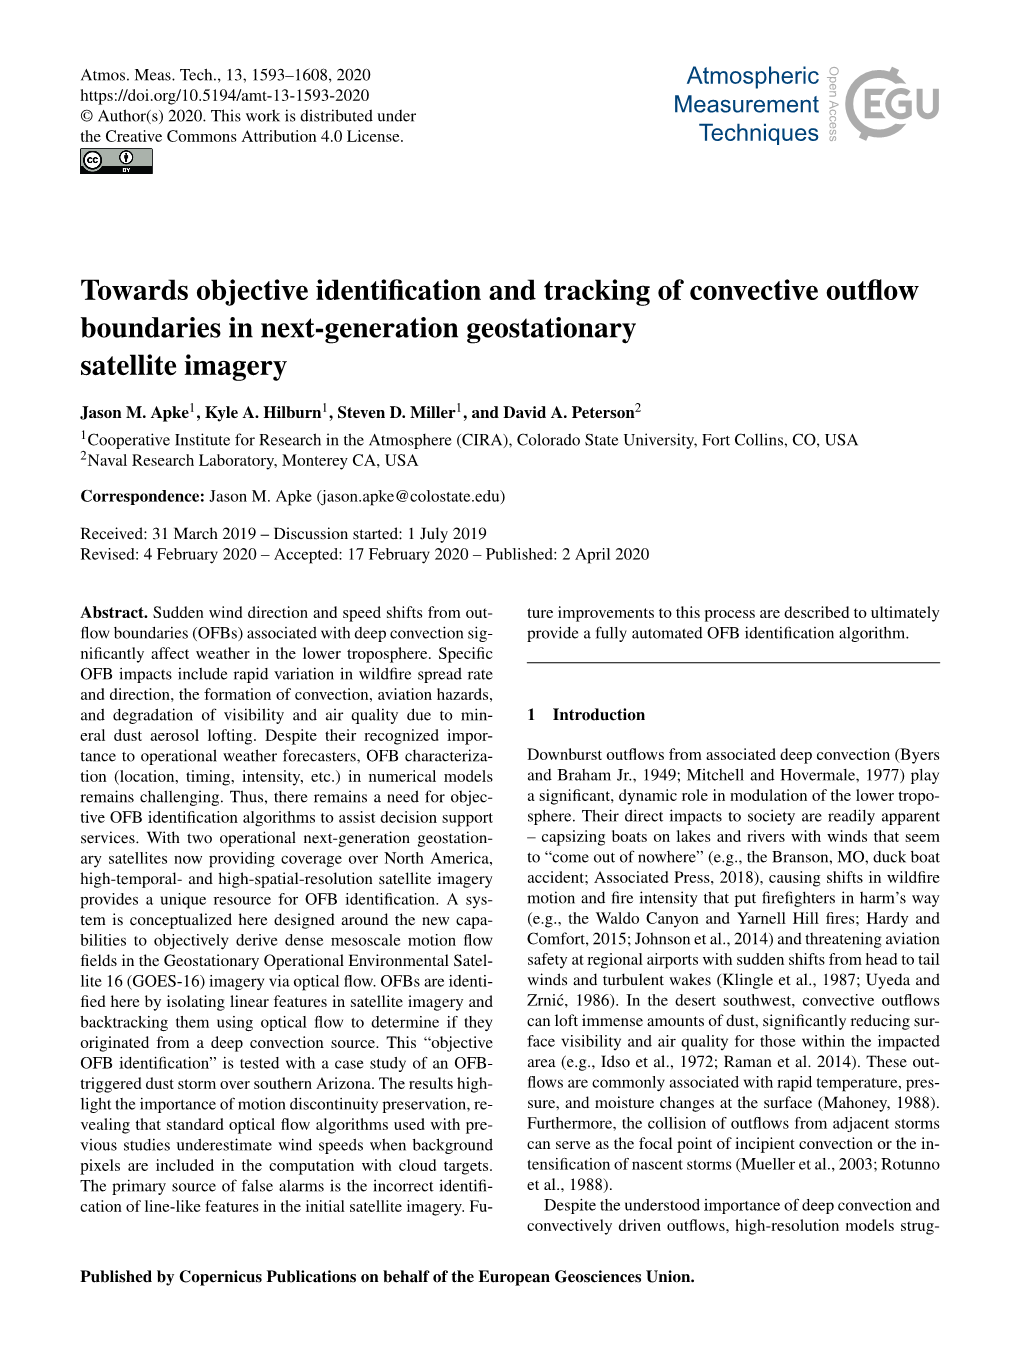 Towards Objective Identification and Tracking of Convective Outflow